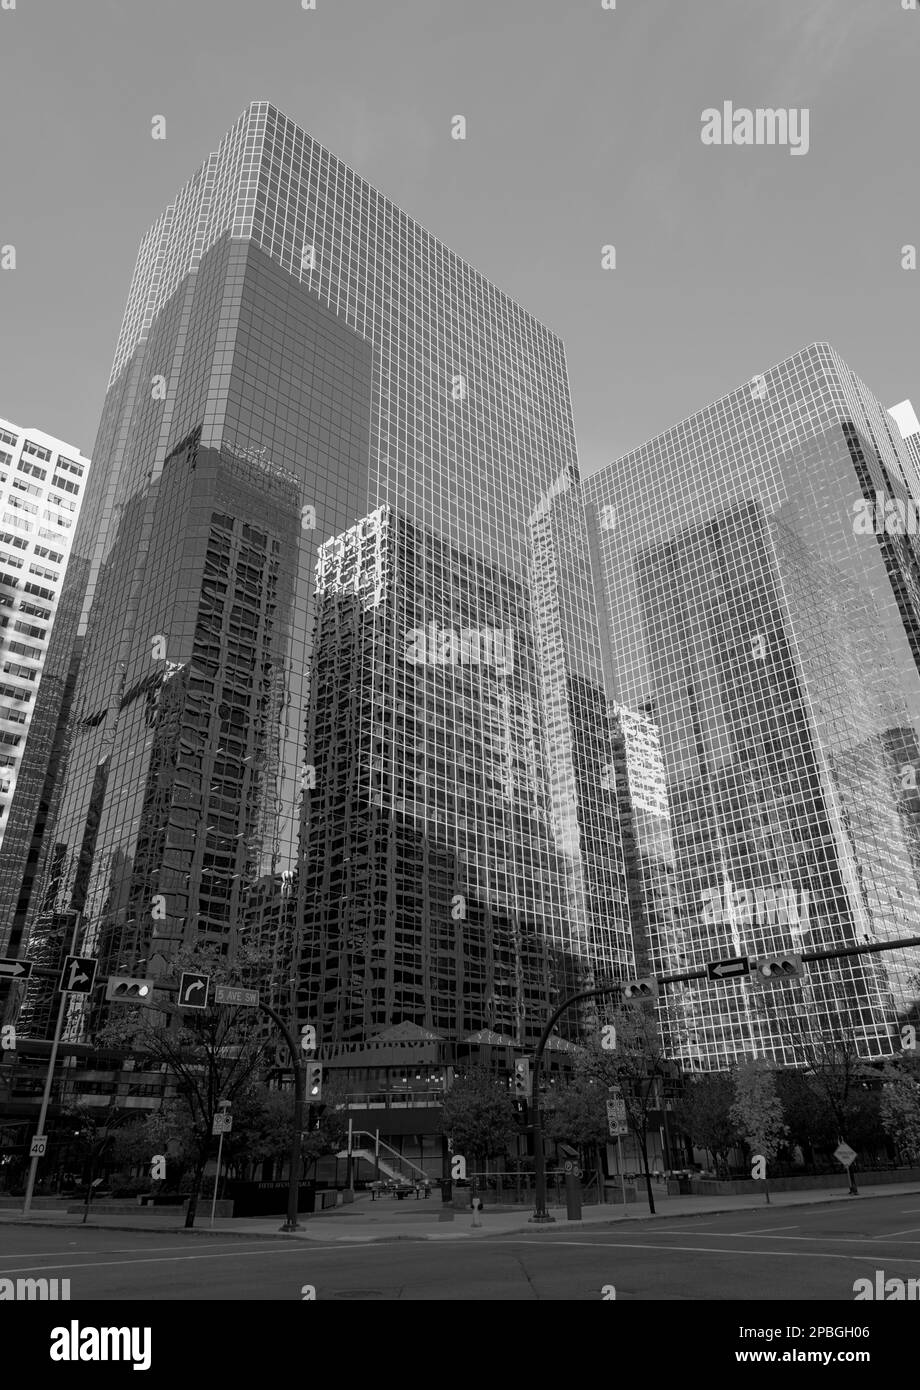 Reflections on Calgary downtown buildings Stock Photo